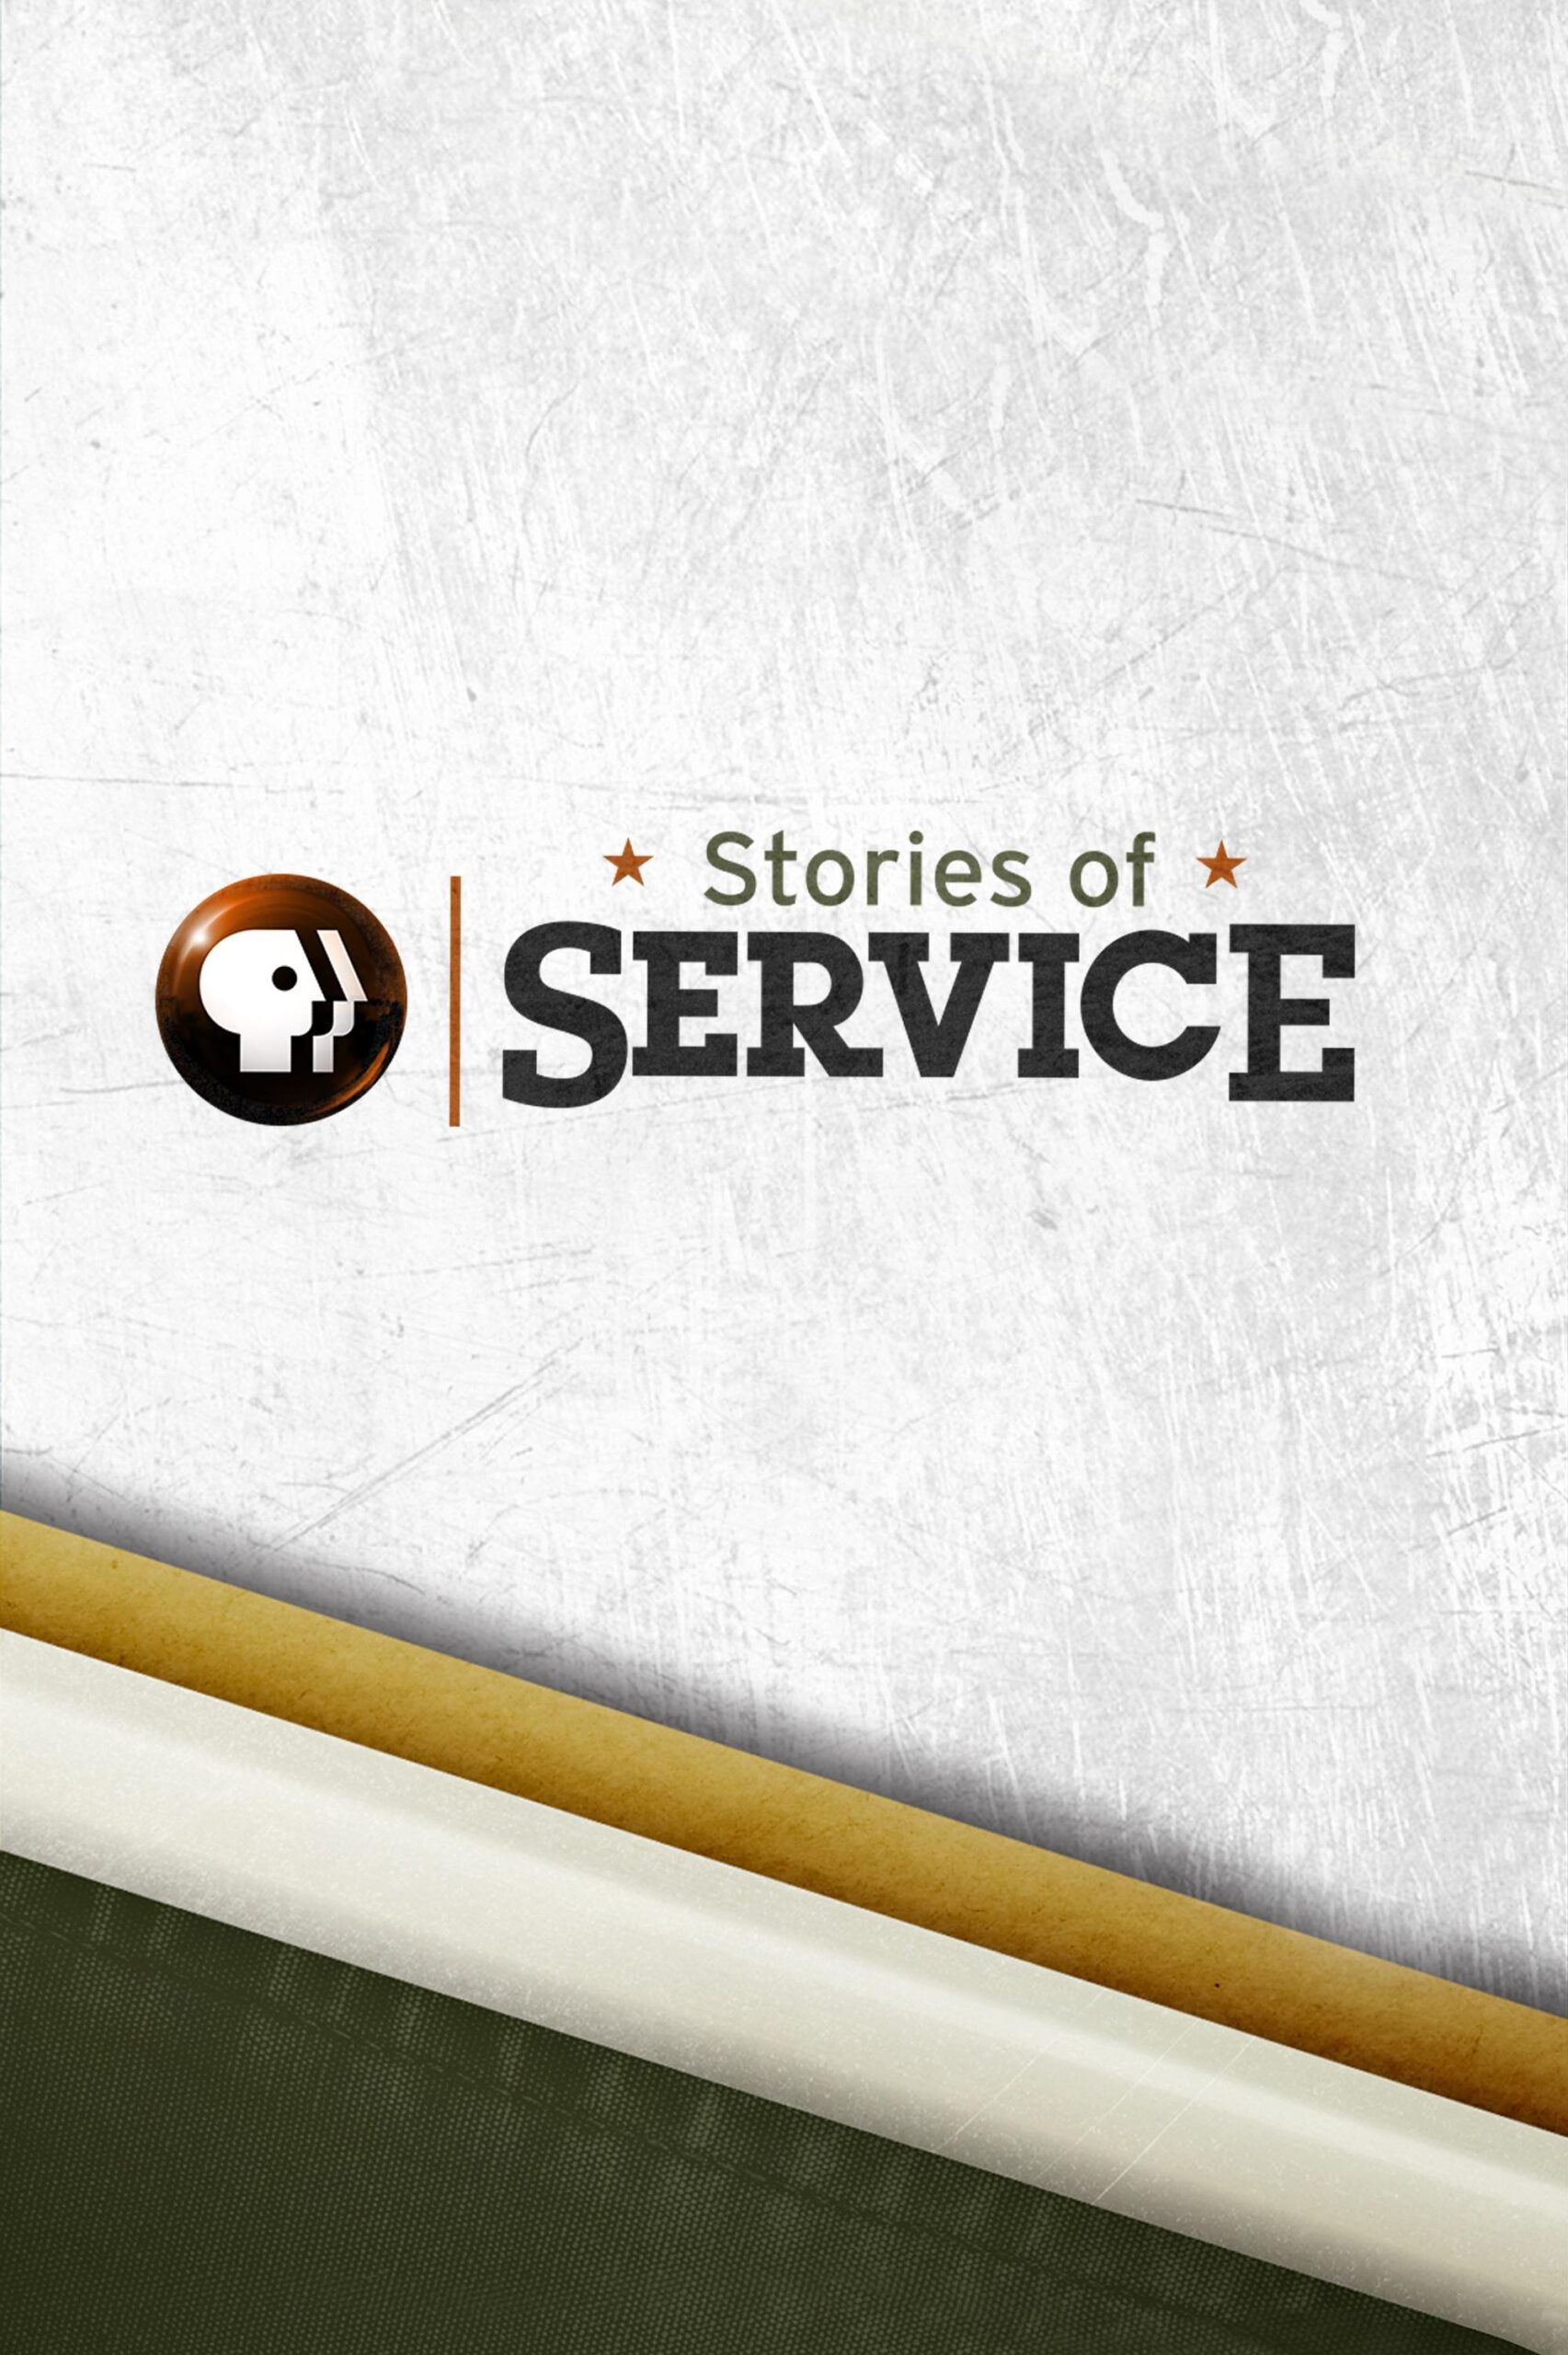 You are currently viewing Stories of Service